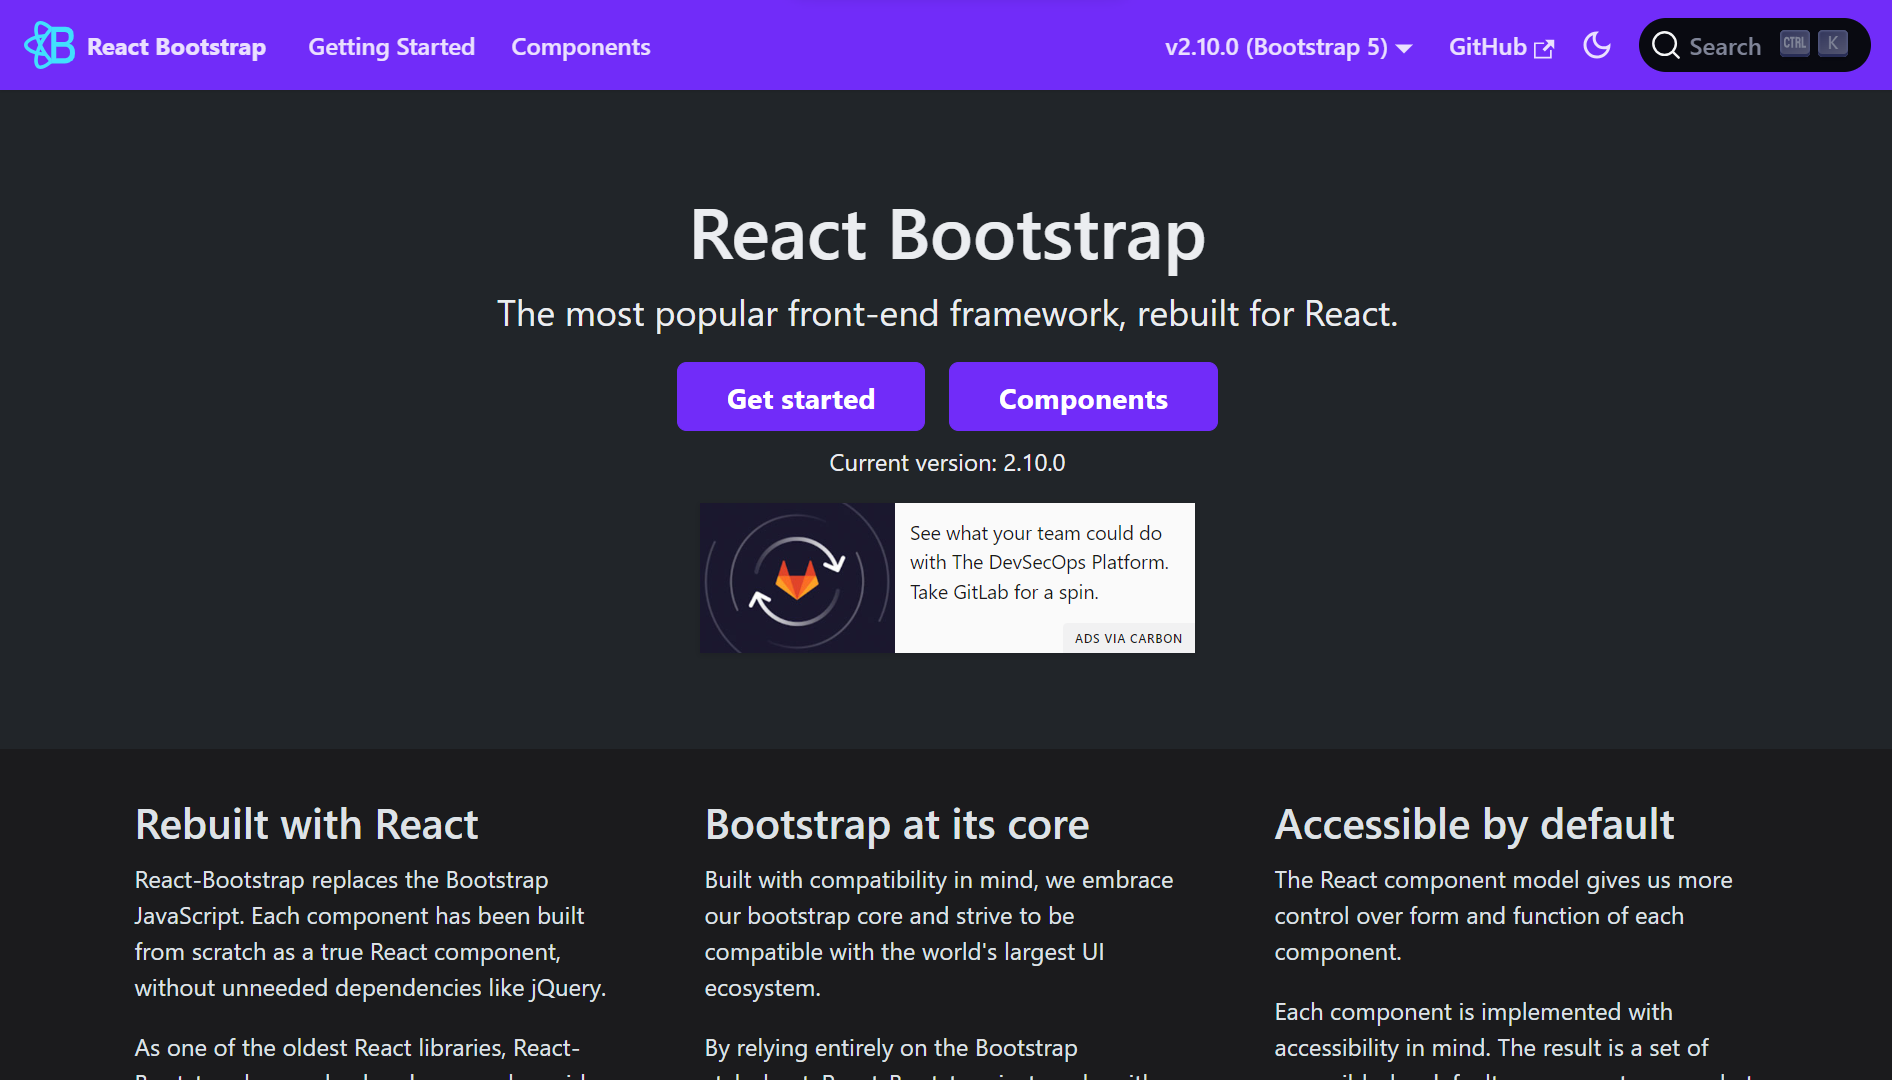 React Bootstrap homepage